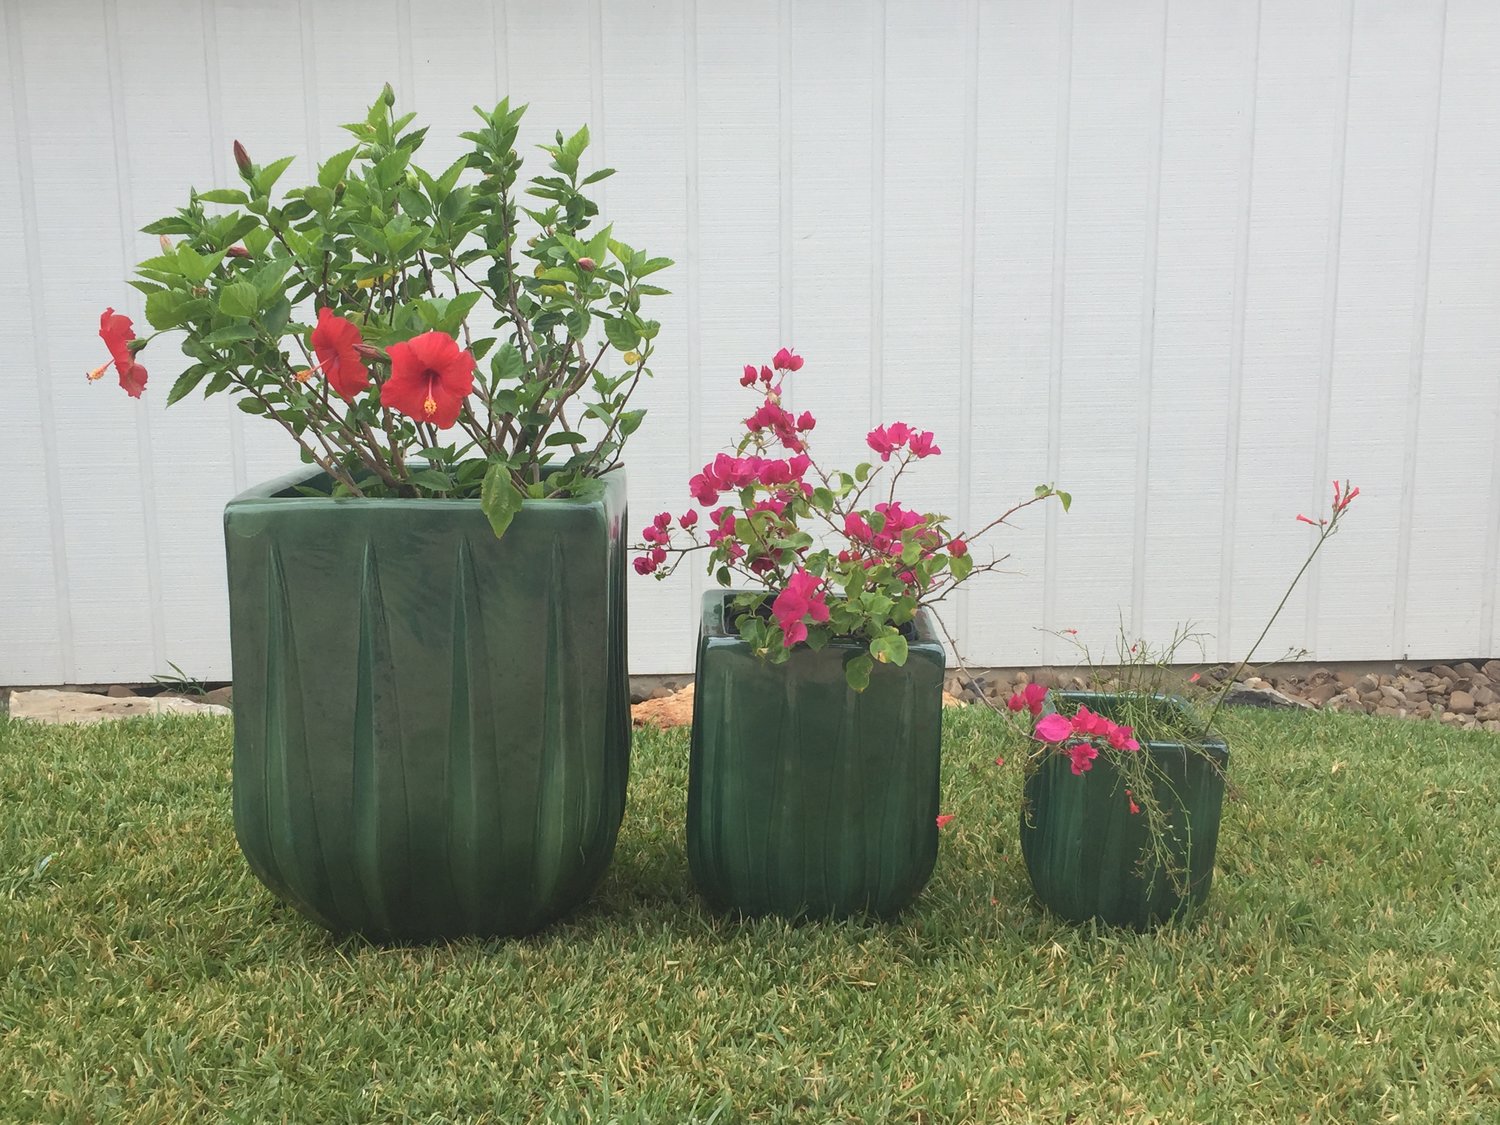 An image of three green square planters in a front yard setting.